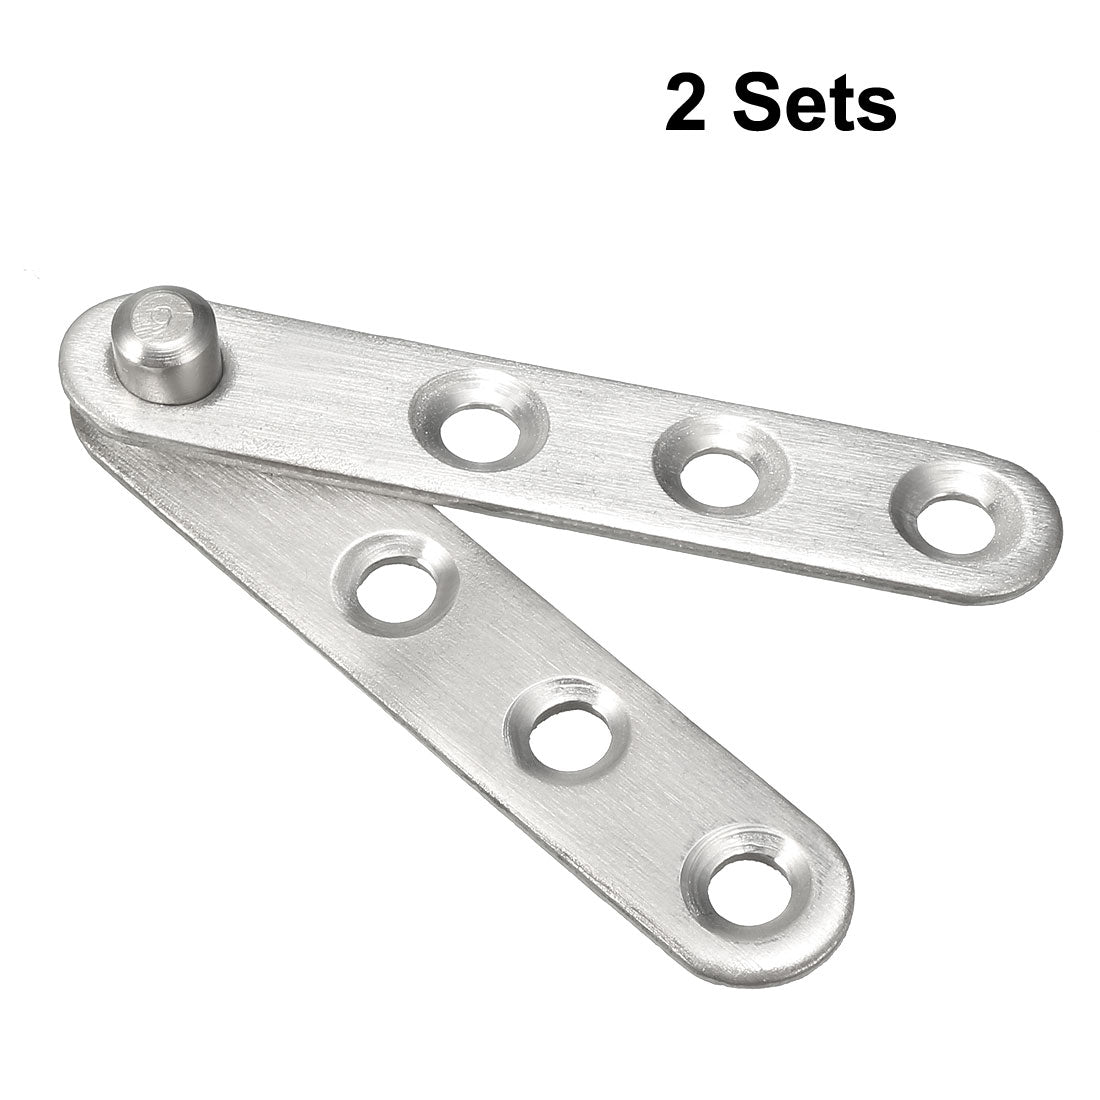 uxcell Uxcell 2 Sets Stainless Steel 360 Degree Rotating Door Pivot Hinge 60mm x 11mm